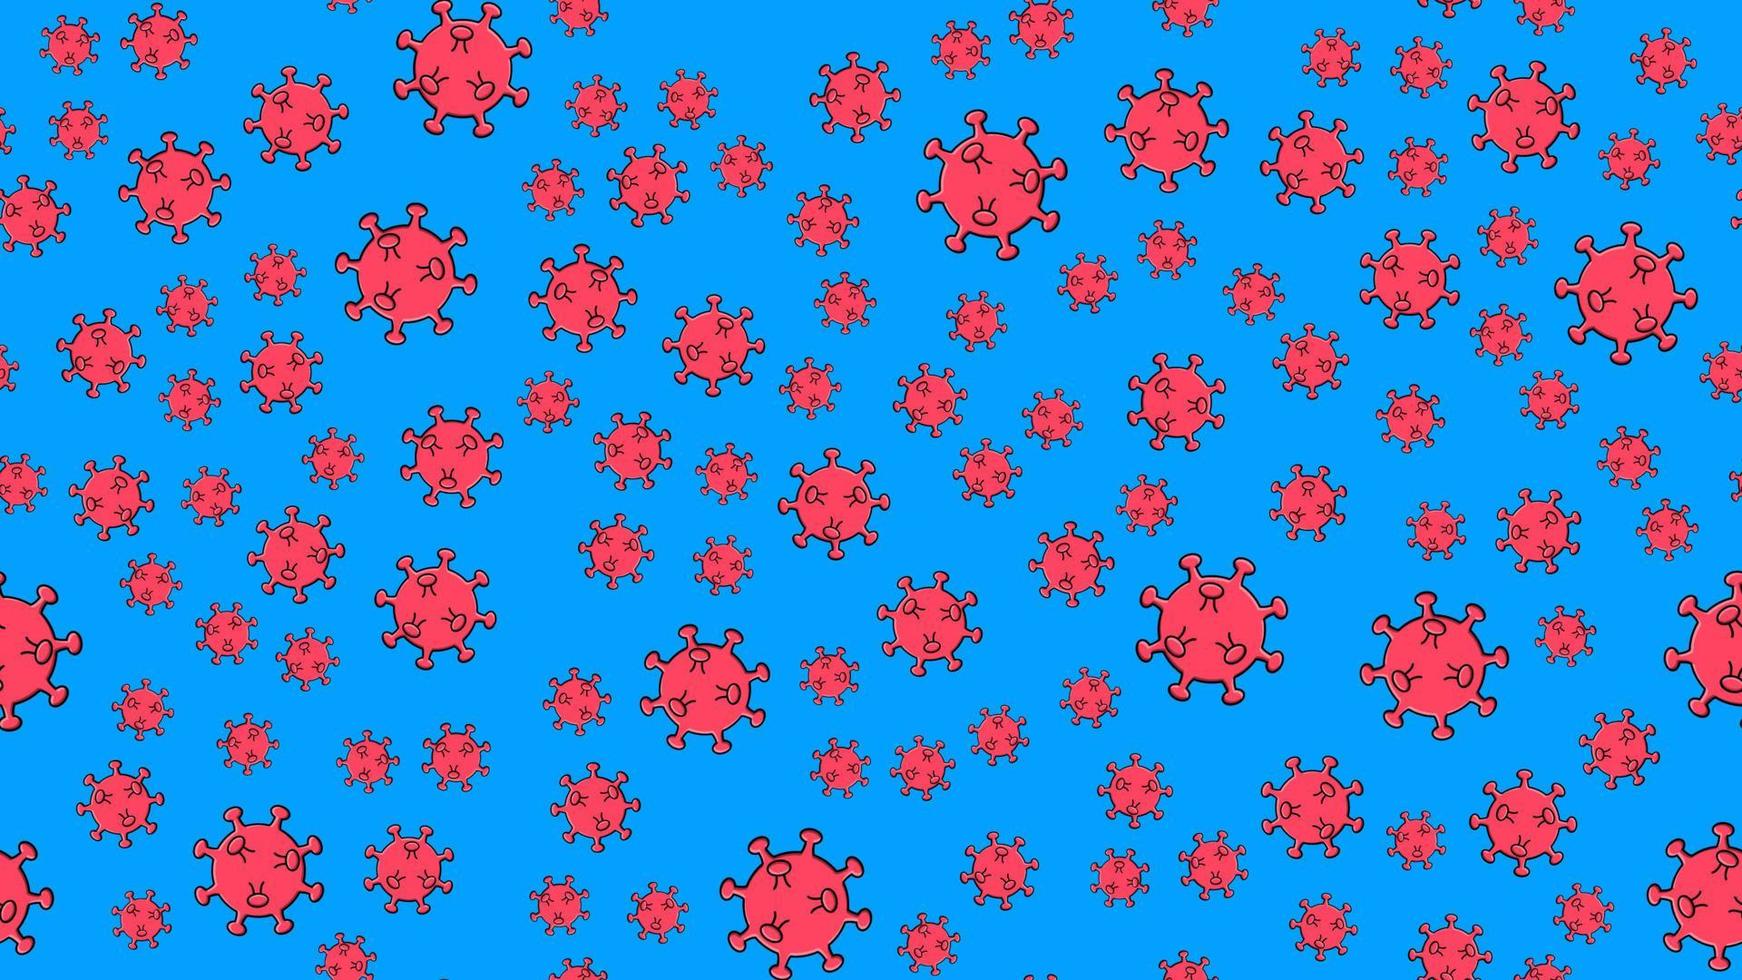 Endless seamless pattern of red dangerous infectious deadly respiratory coronaviruses pandemic epidemic, Covid-19 microbe viruses causing pneumonia on a blue background vector